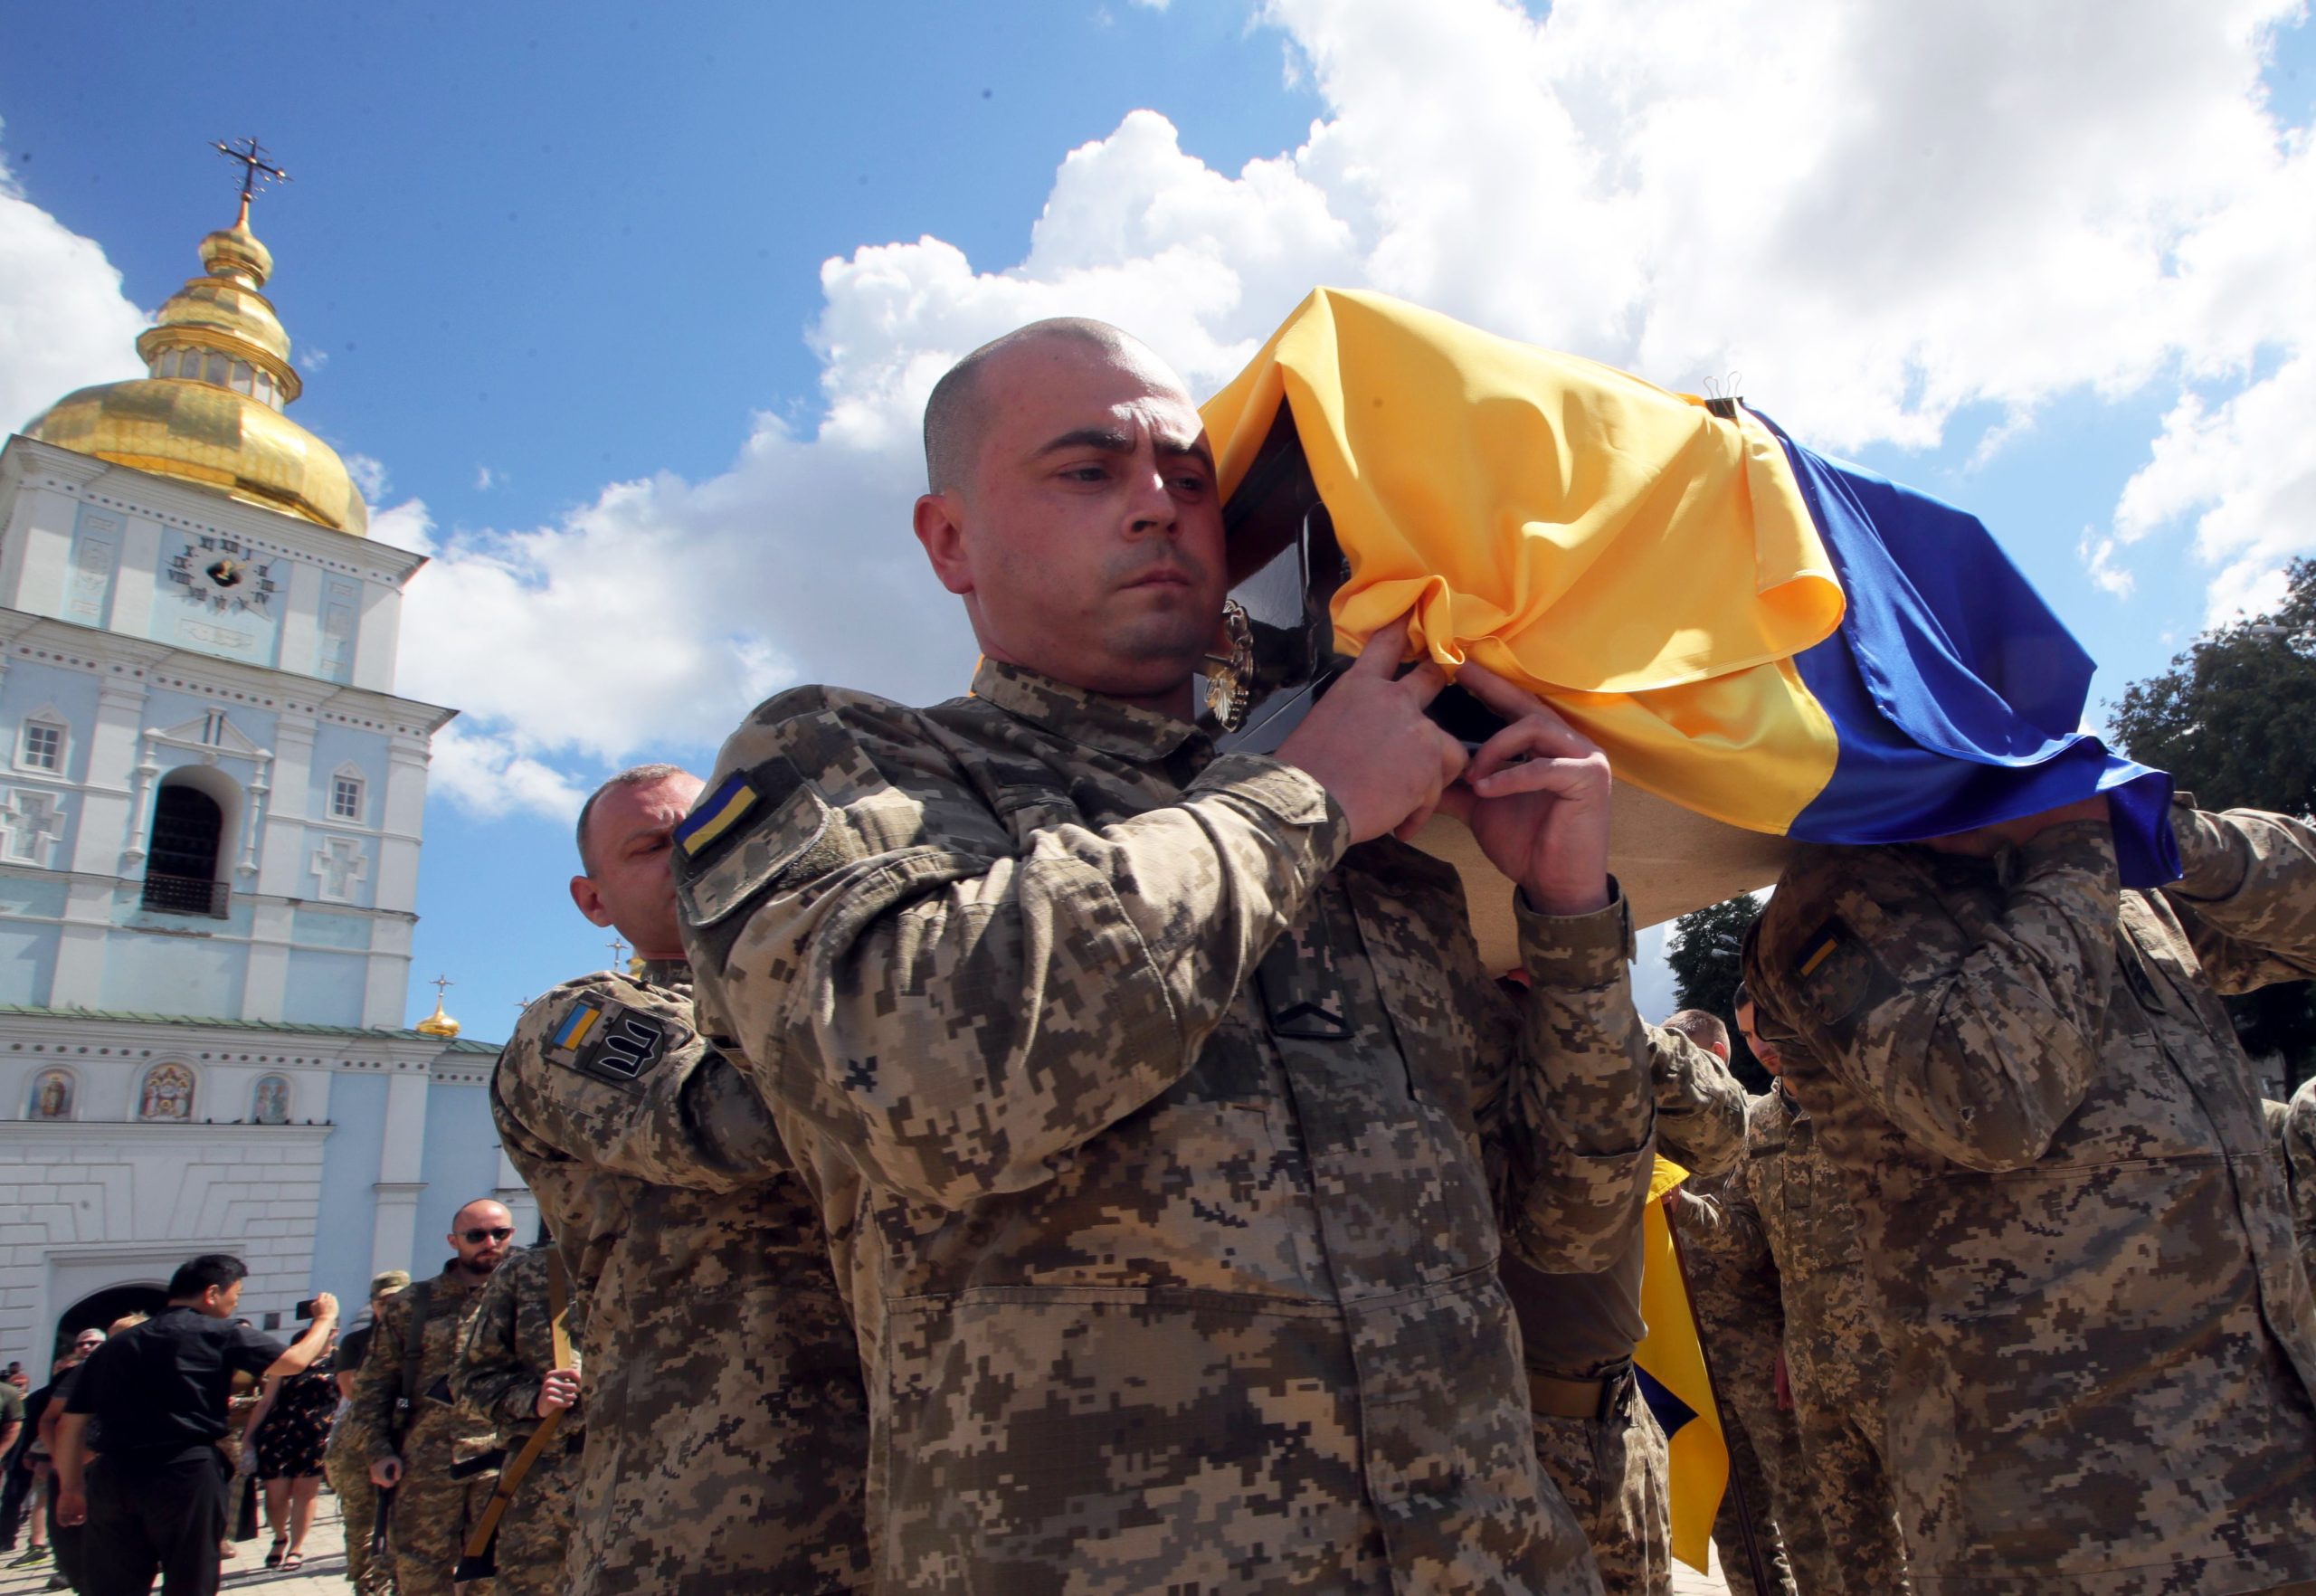 Photo: KYIV, UKRAINE - JULY 18, 2022 - Soldiers carry the coffin covered with a Ukrainian flag with the body of the 93rd Independent Kholodnyi Yar Mechanized Brigade serviceman known by his nom de guerre 'Fanat' after a memorial service at St Michael's Cathedral, Kyiv, capital of Ukraine. Credit: Pavlo_Bagmut via Reuters Connect